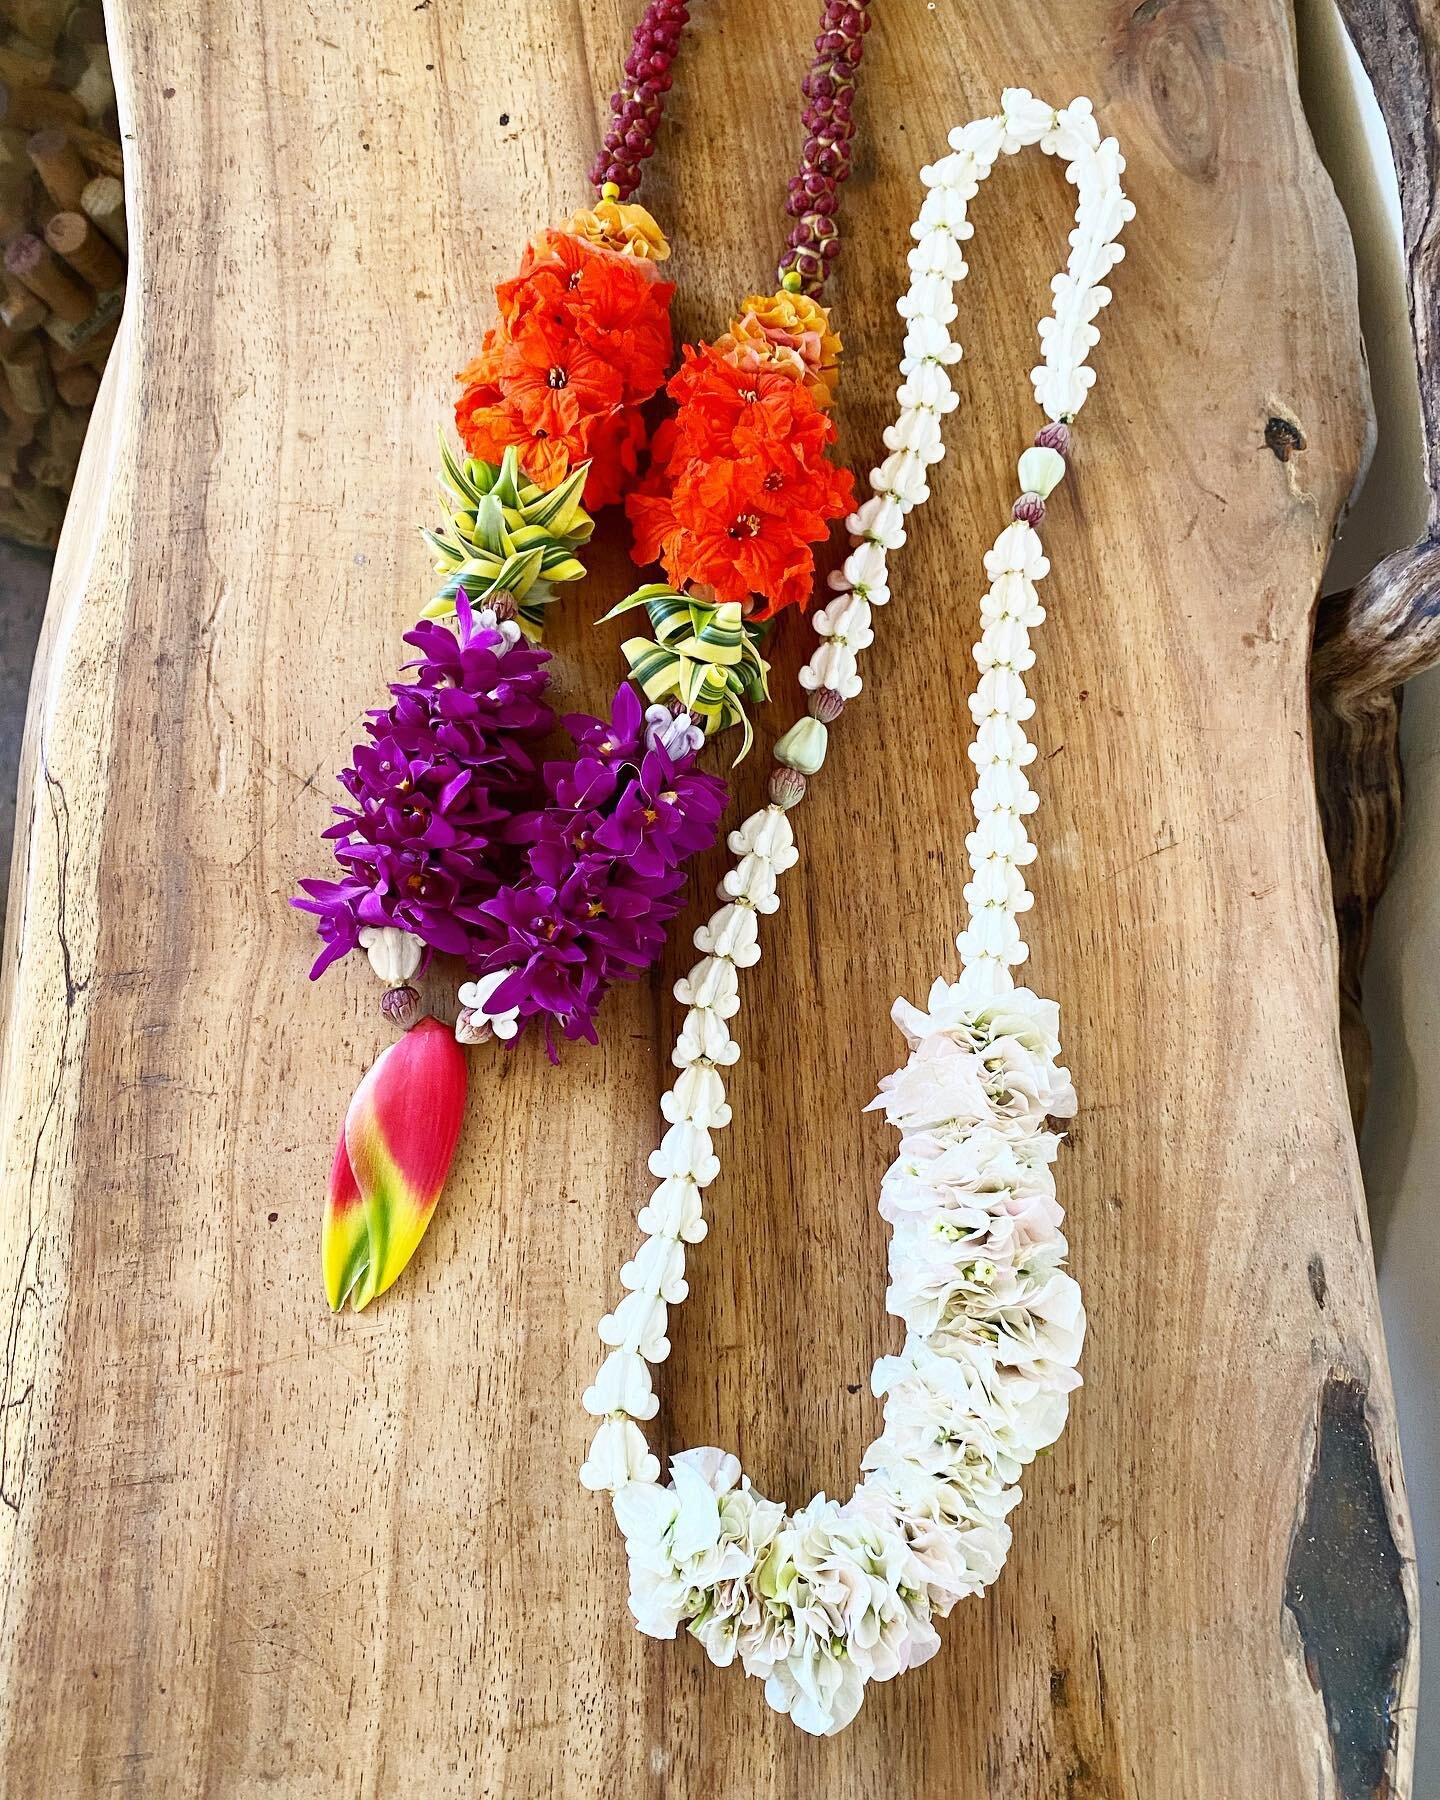 &ldquo;Tomorrow&rsquo;s going to be a brighter day,&rdquo; a song by Jim Croce came on while I was making this rainbow and cloud lei 🌈 🌧  it was to commemorate a husband who passed away suddenly and the family saw a rainbow recently after&hellip;li